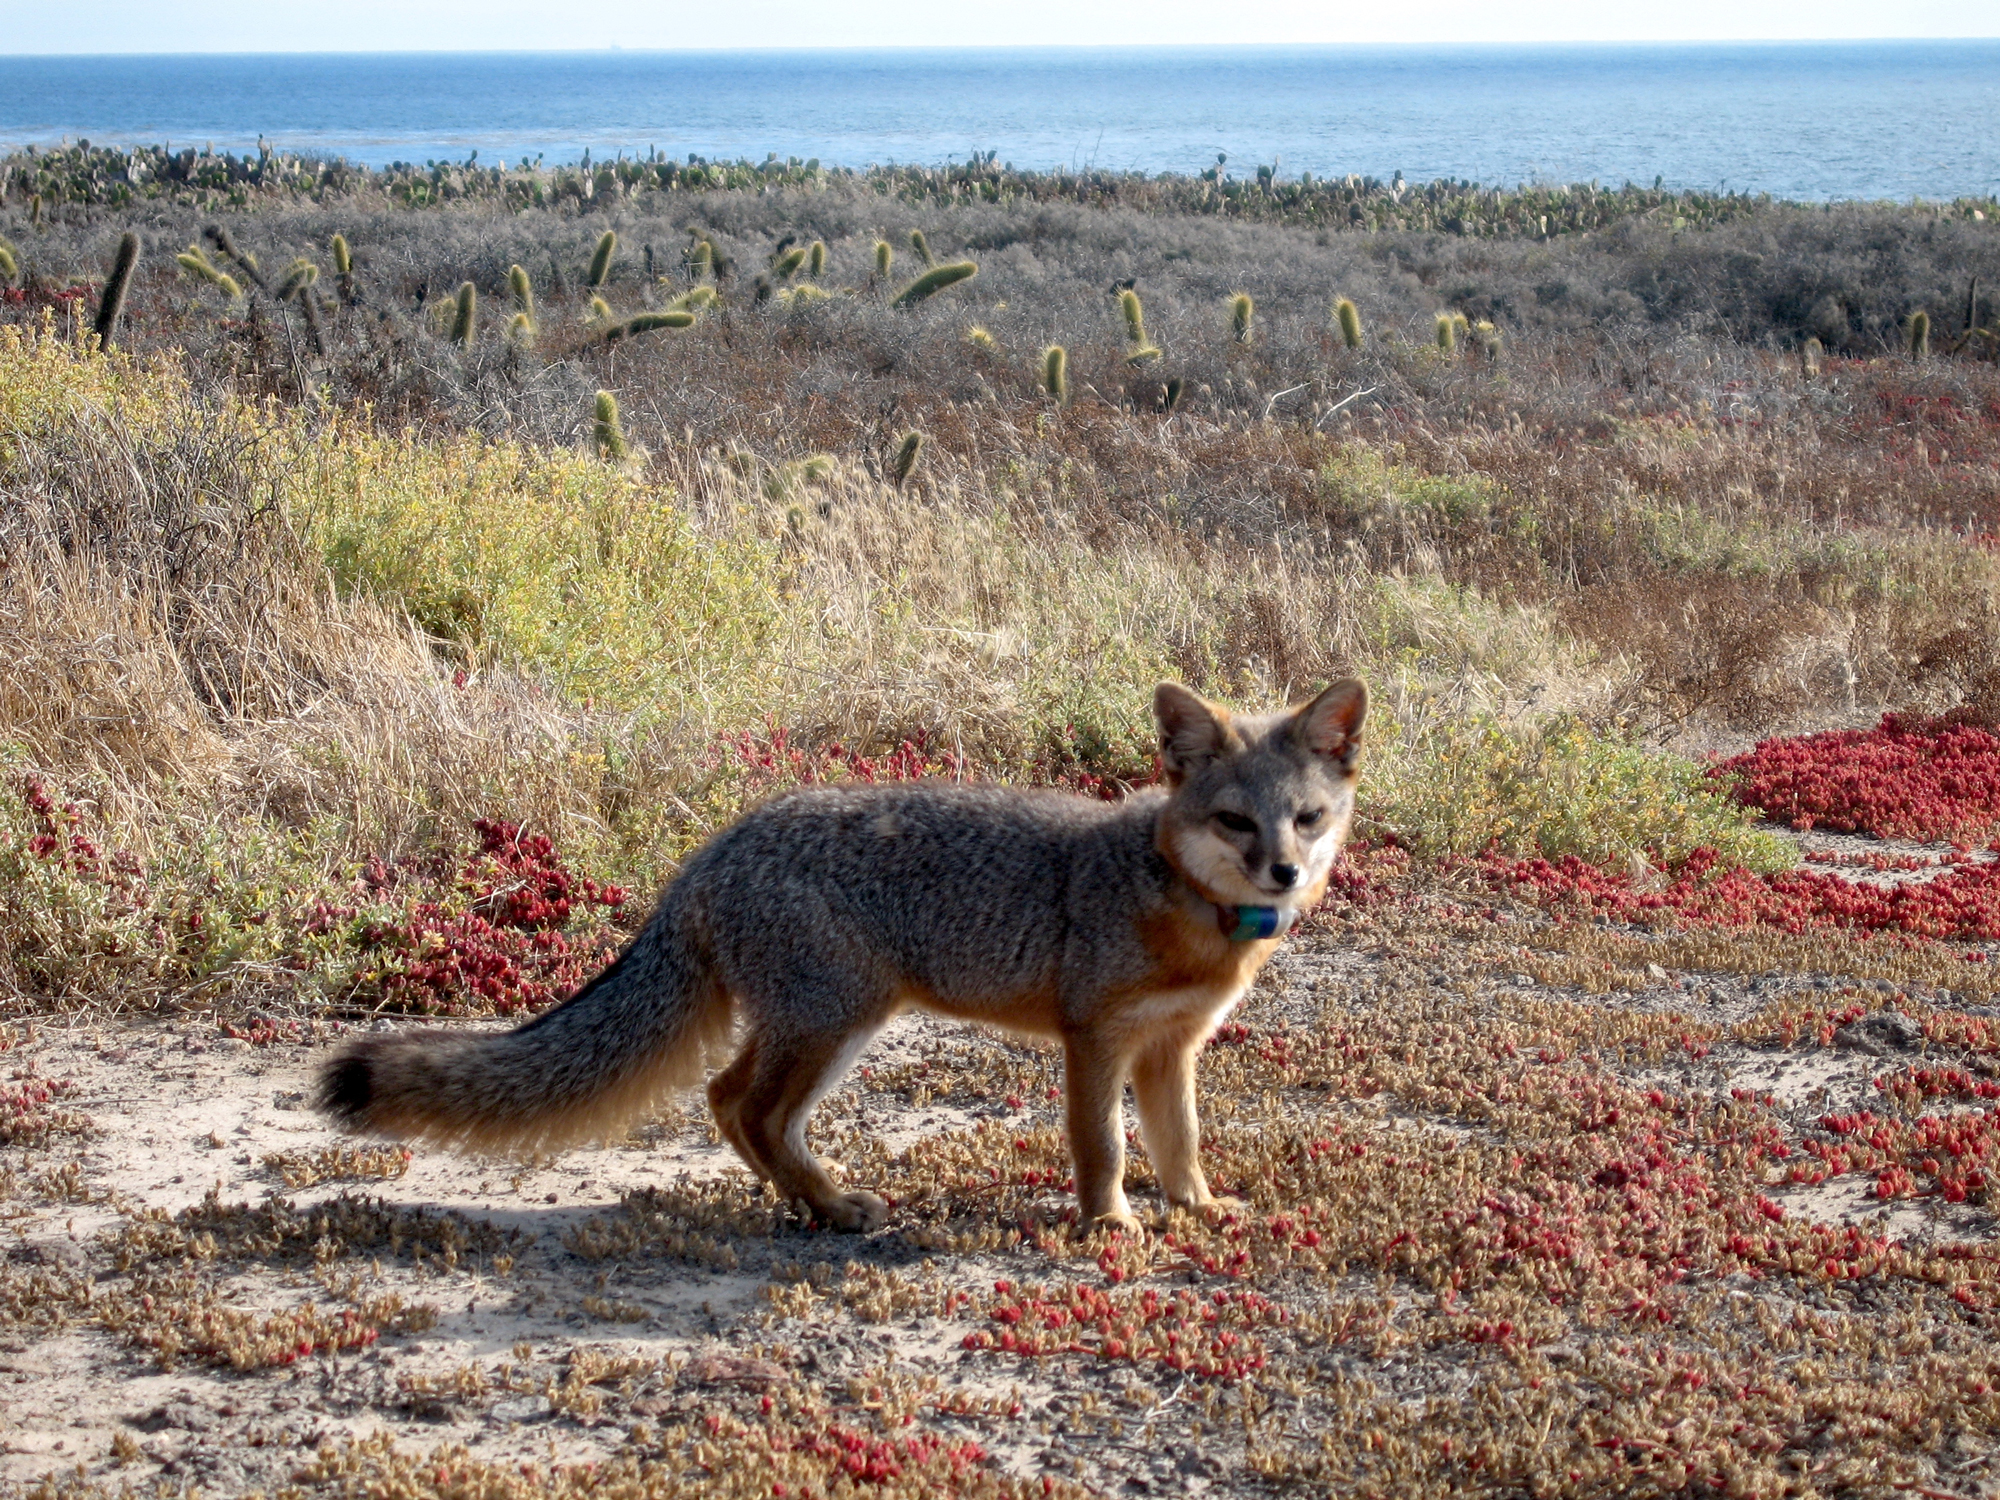 San Clemente Island fox on the island, water in distance photo by Jessica Sanchez